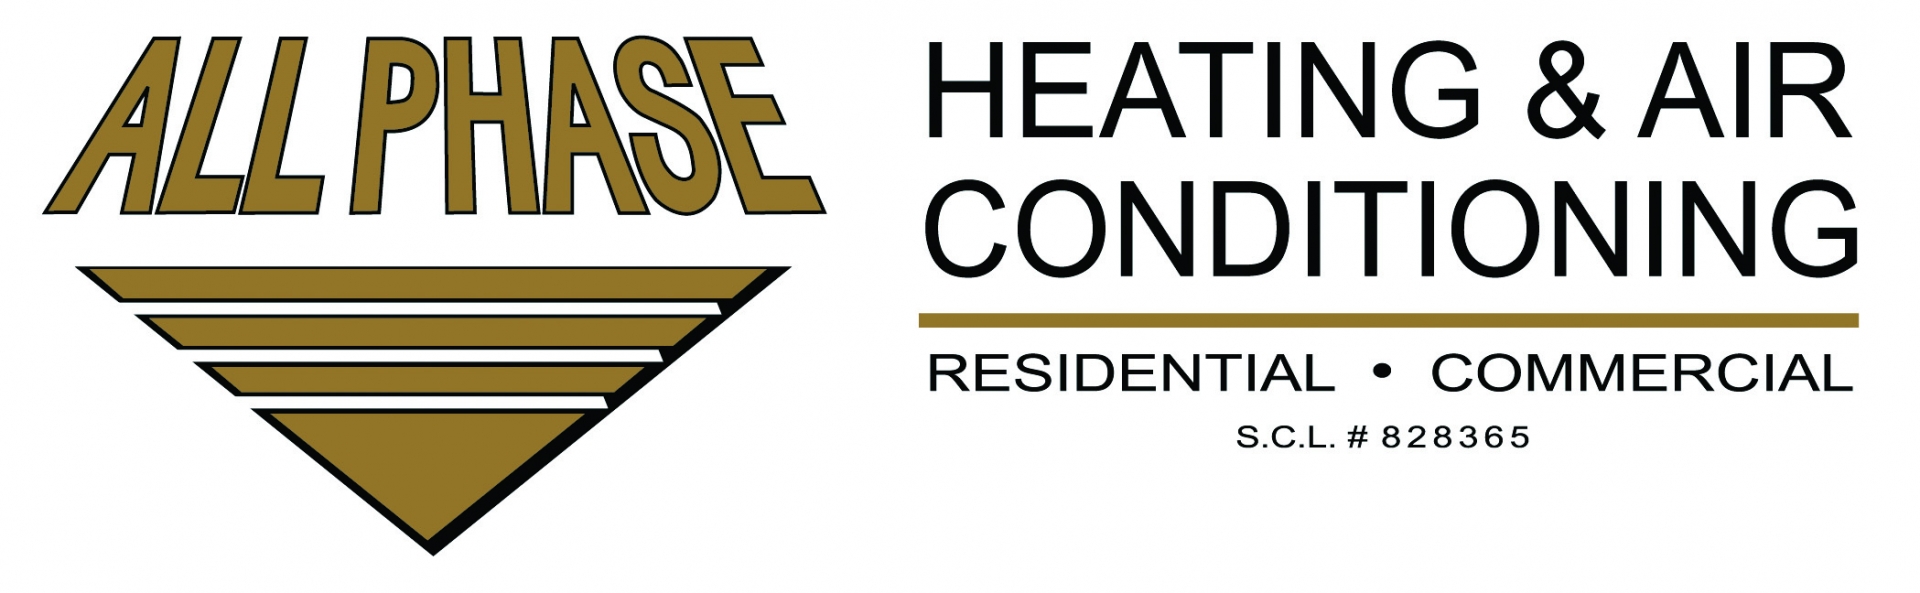 All Phase Heating & Air Conditioning, Inc. logo